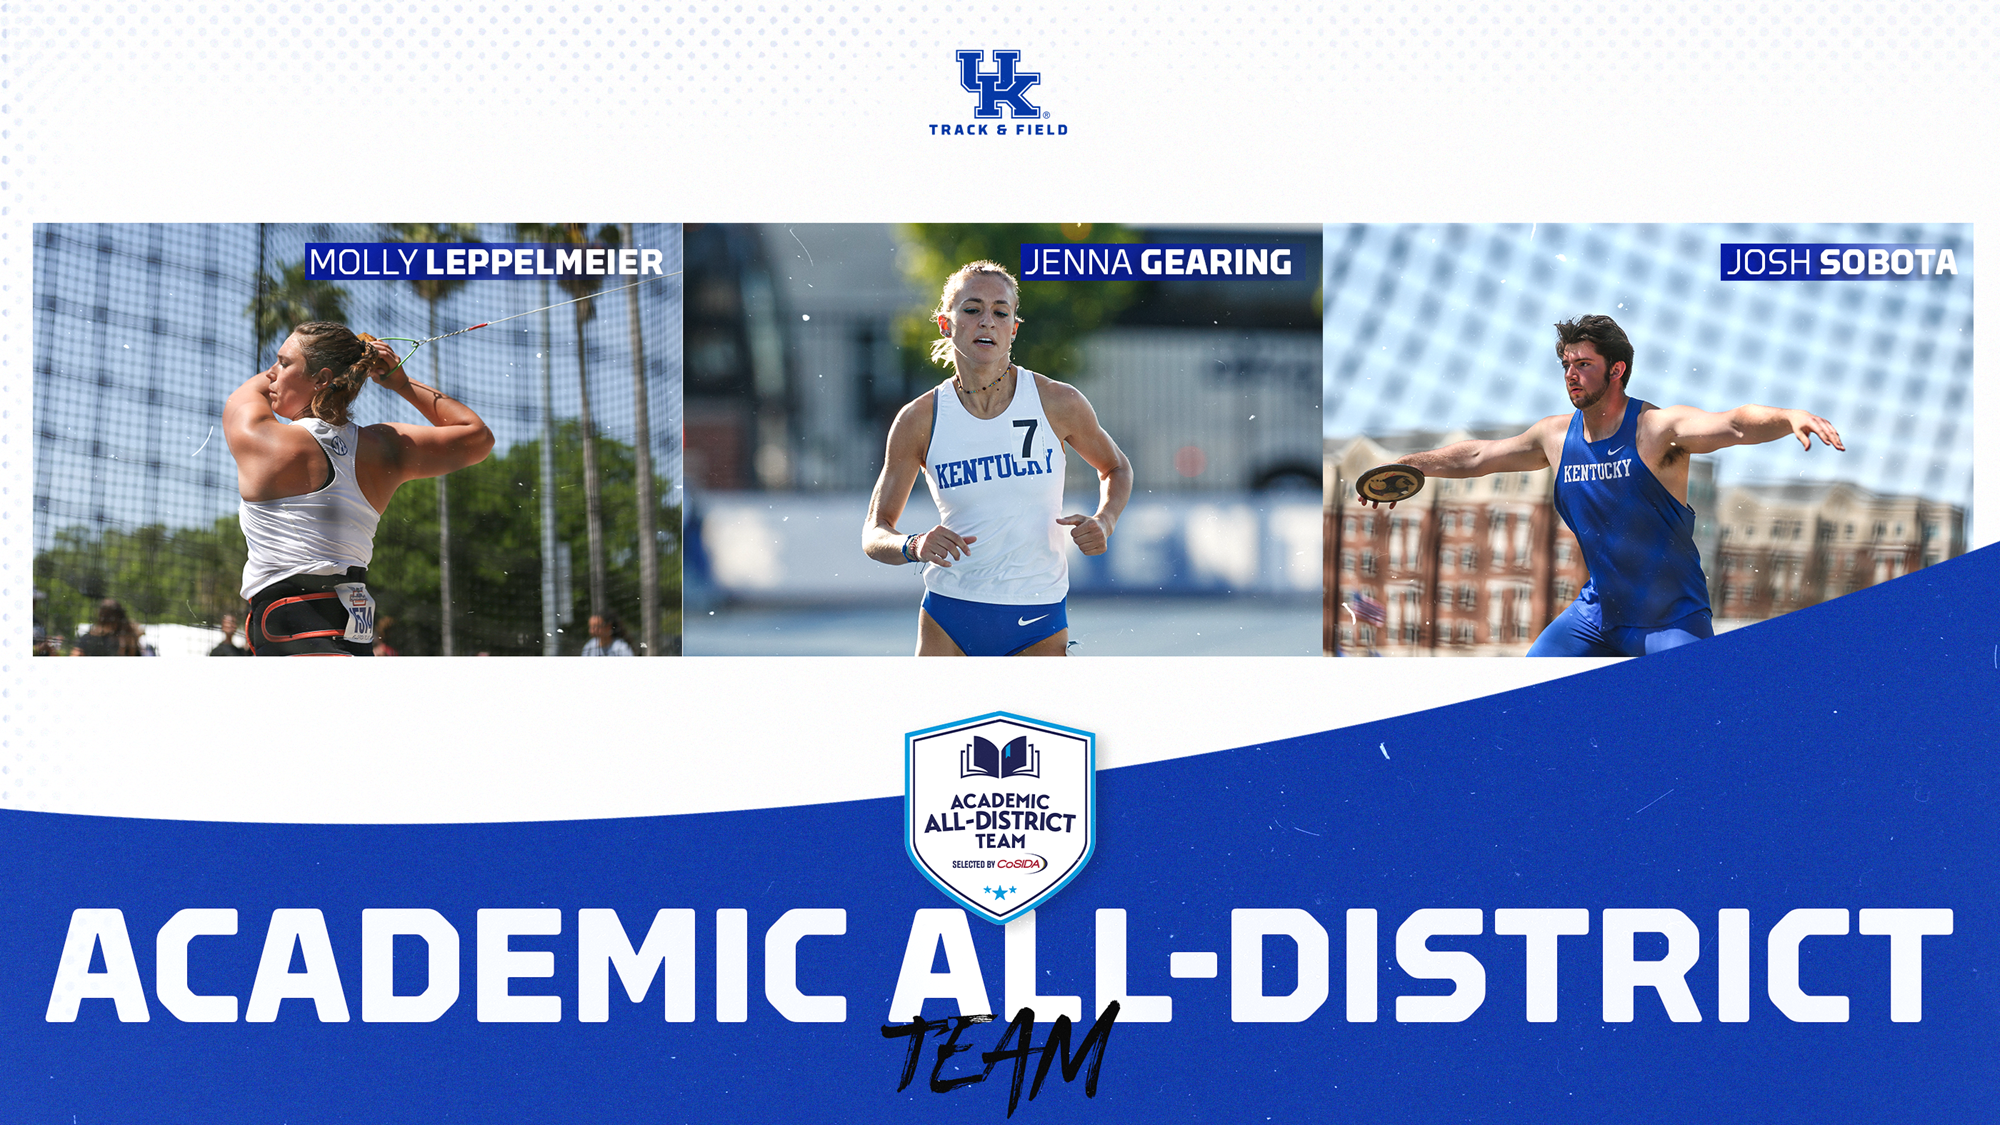 Gearing, Leppelmeier, Sobota Selected to CoSIDA Academic All-District Team